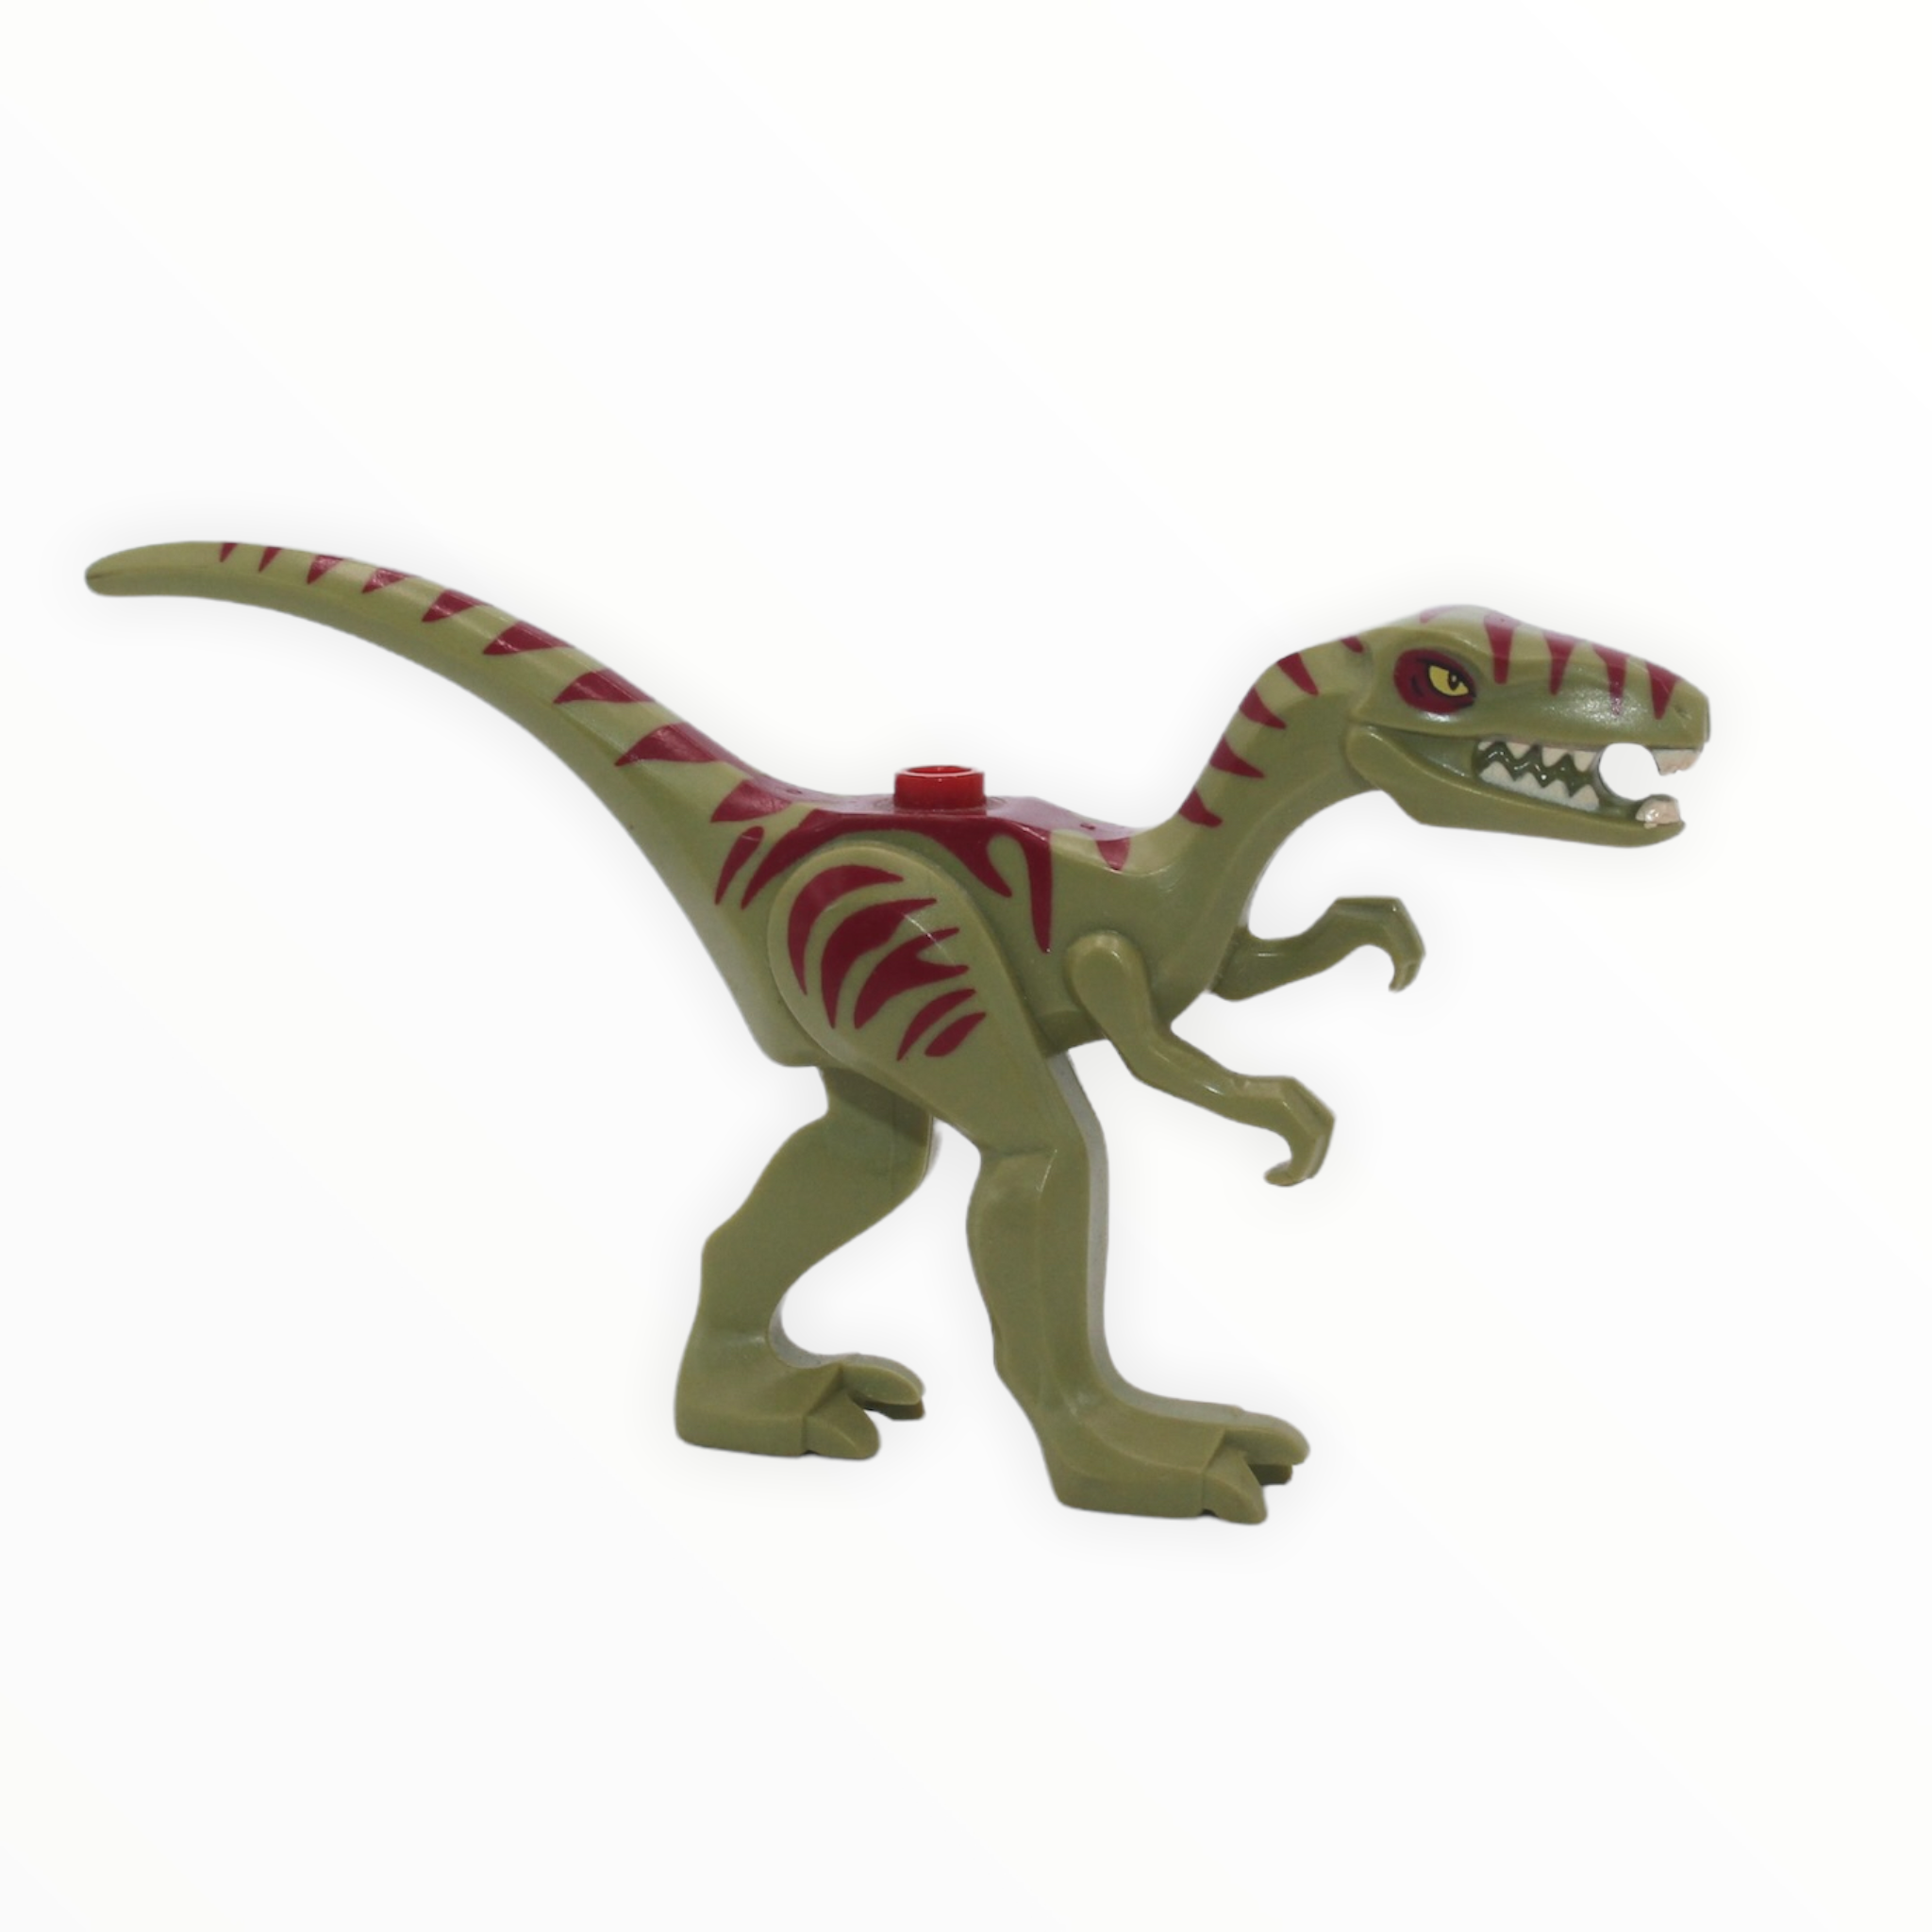 Coelophysis / Gallimimus (olive green with dark red stripes)